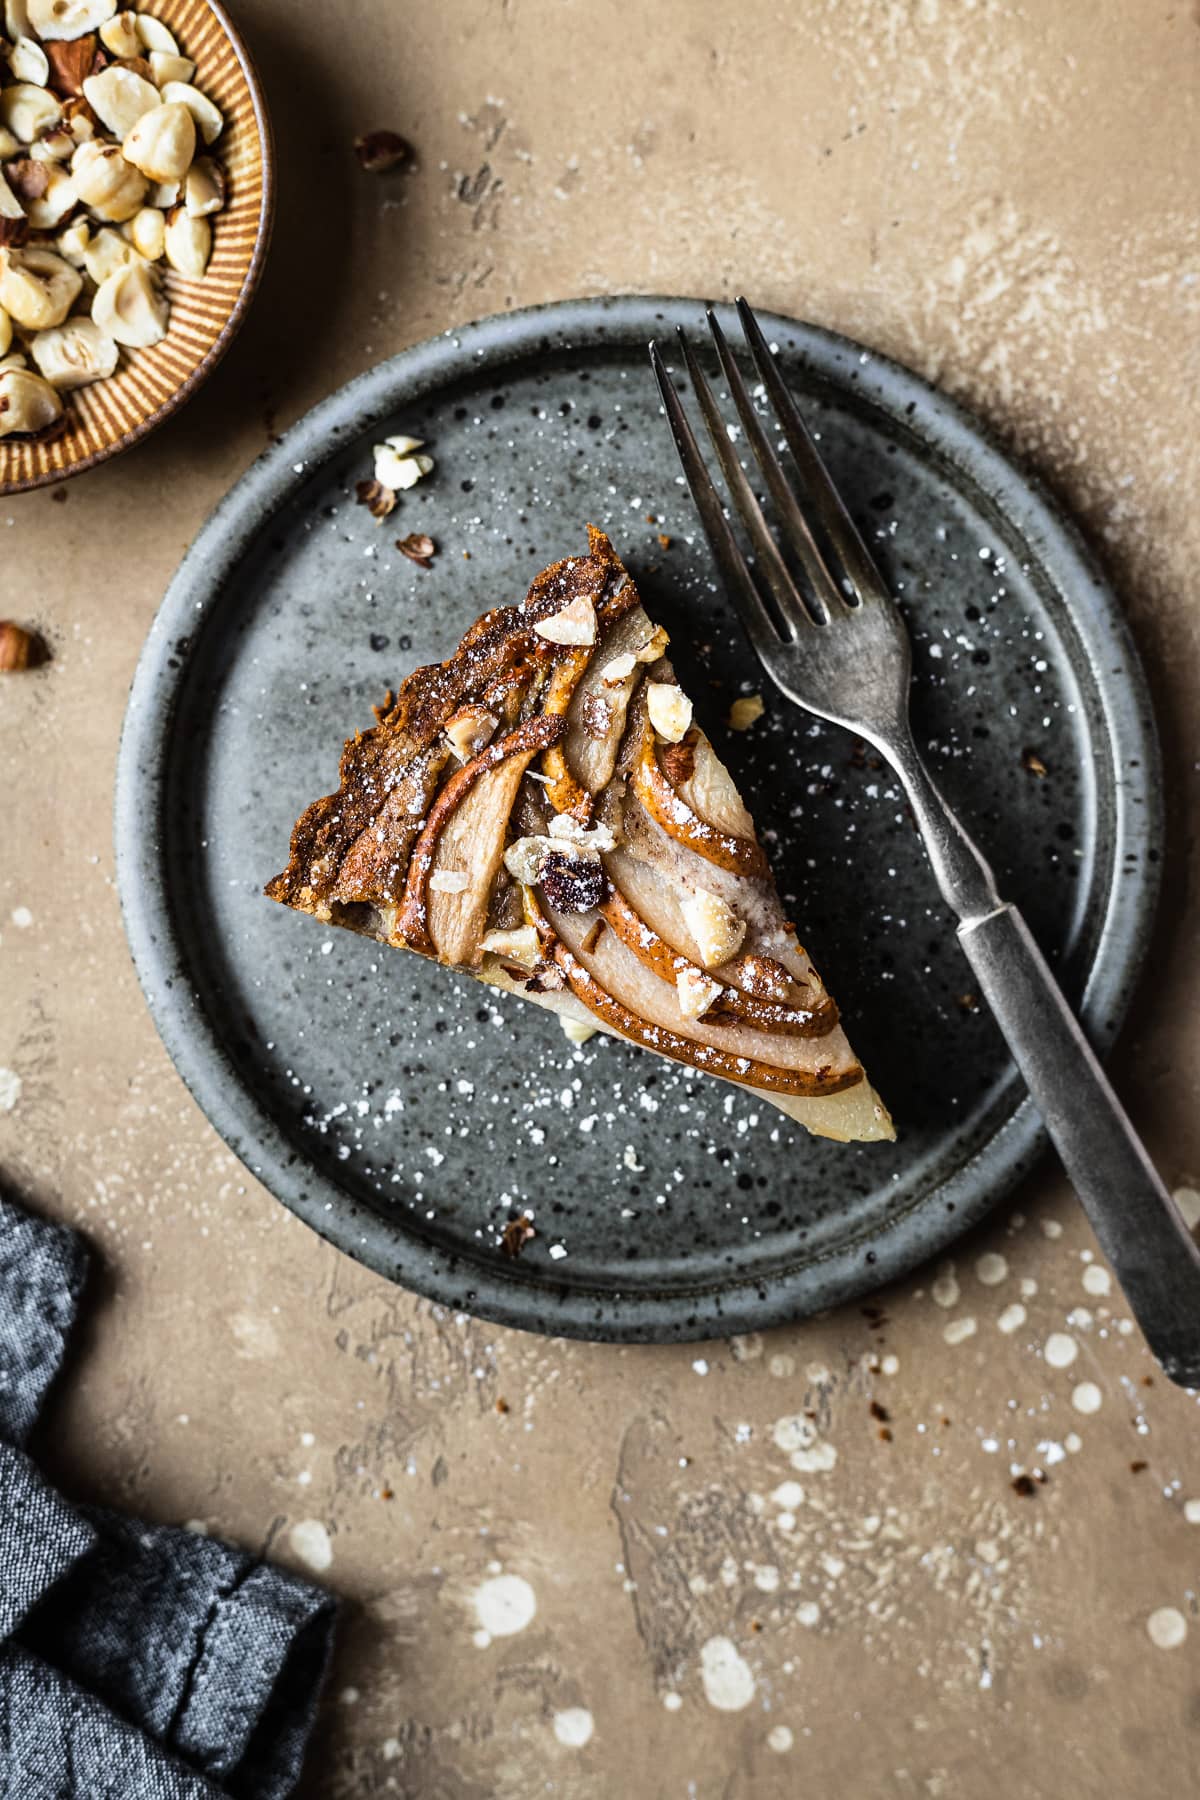 Pear hazelnut tart slice on a speckled grey blue ceramic plate. A vintage fork rests on the right side of the plate. The plate is on a warm tan textured stone background. A small bit of a textured grey napkin peeks out from the bottom left corner, and a small view of a bowl of chopped hazelnuts is visible at top left.